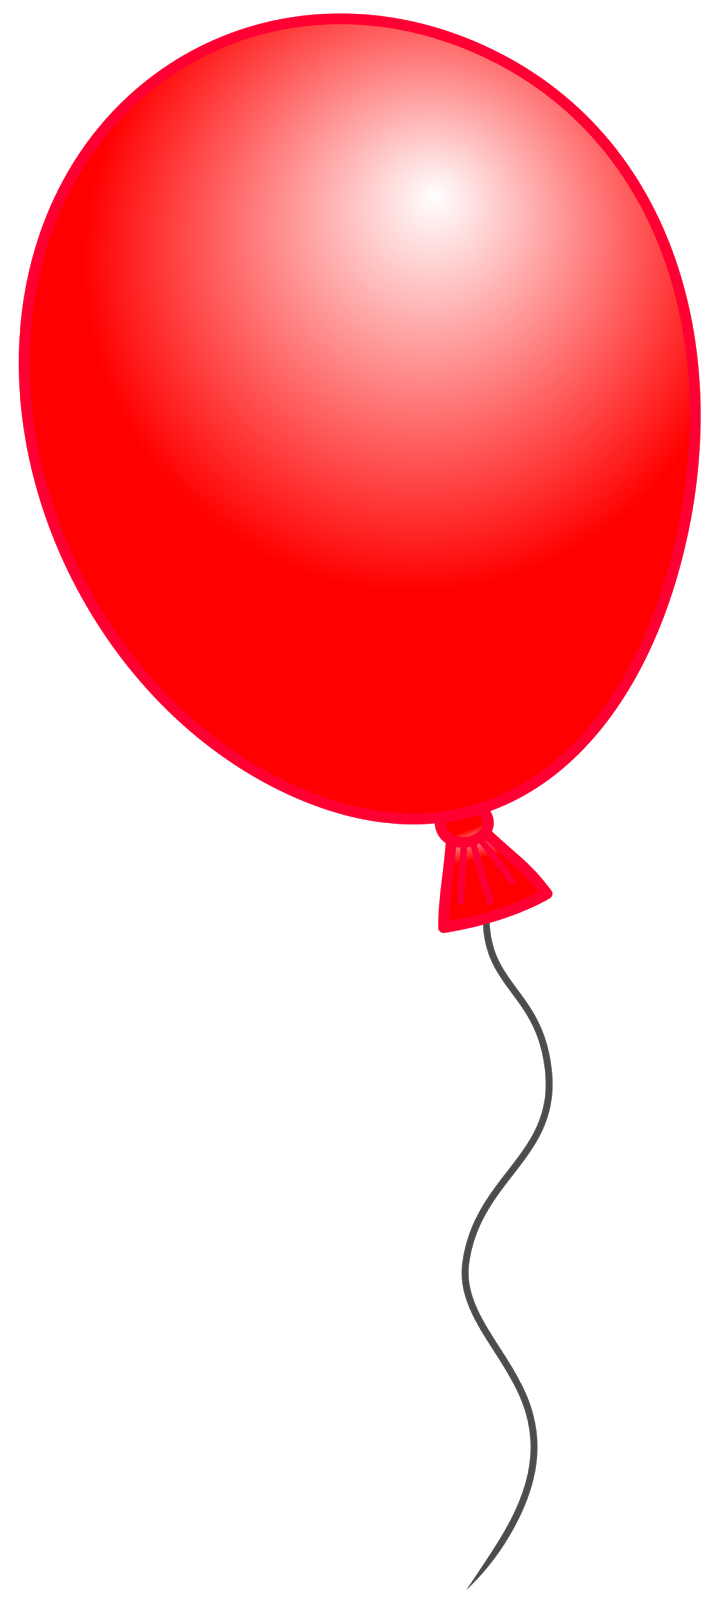 You Can Use Each Balloon On I - Balloon Images Clip Art